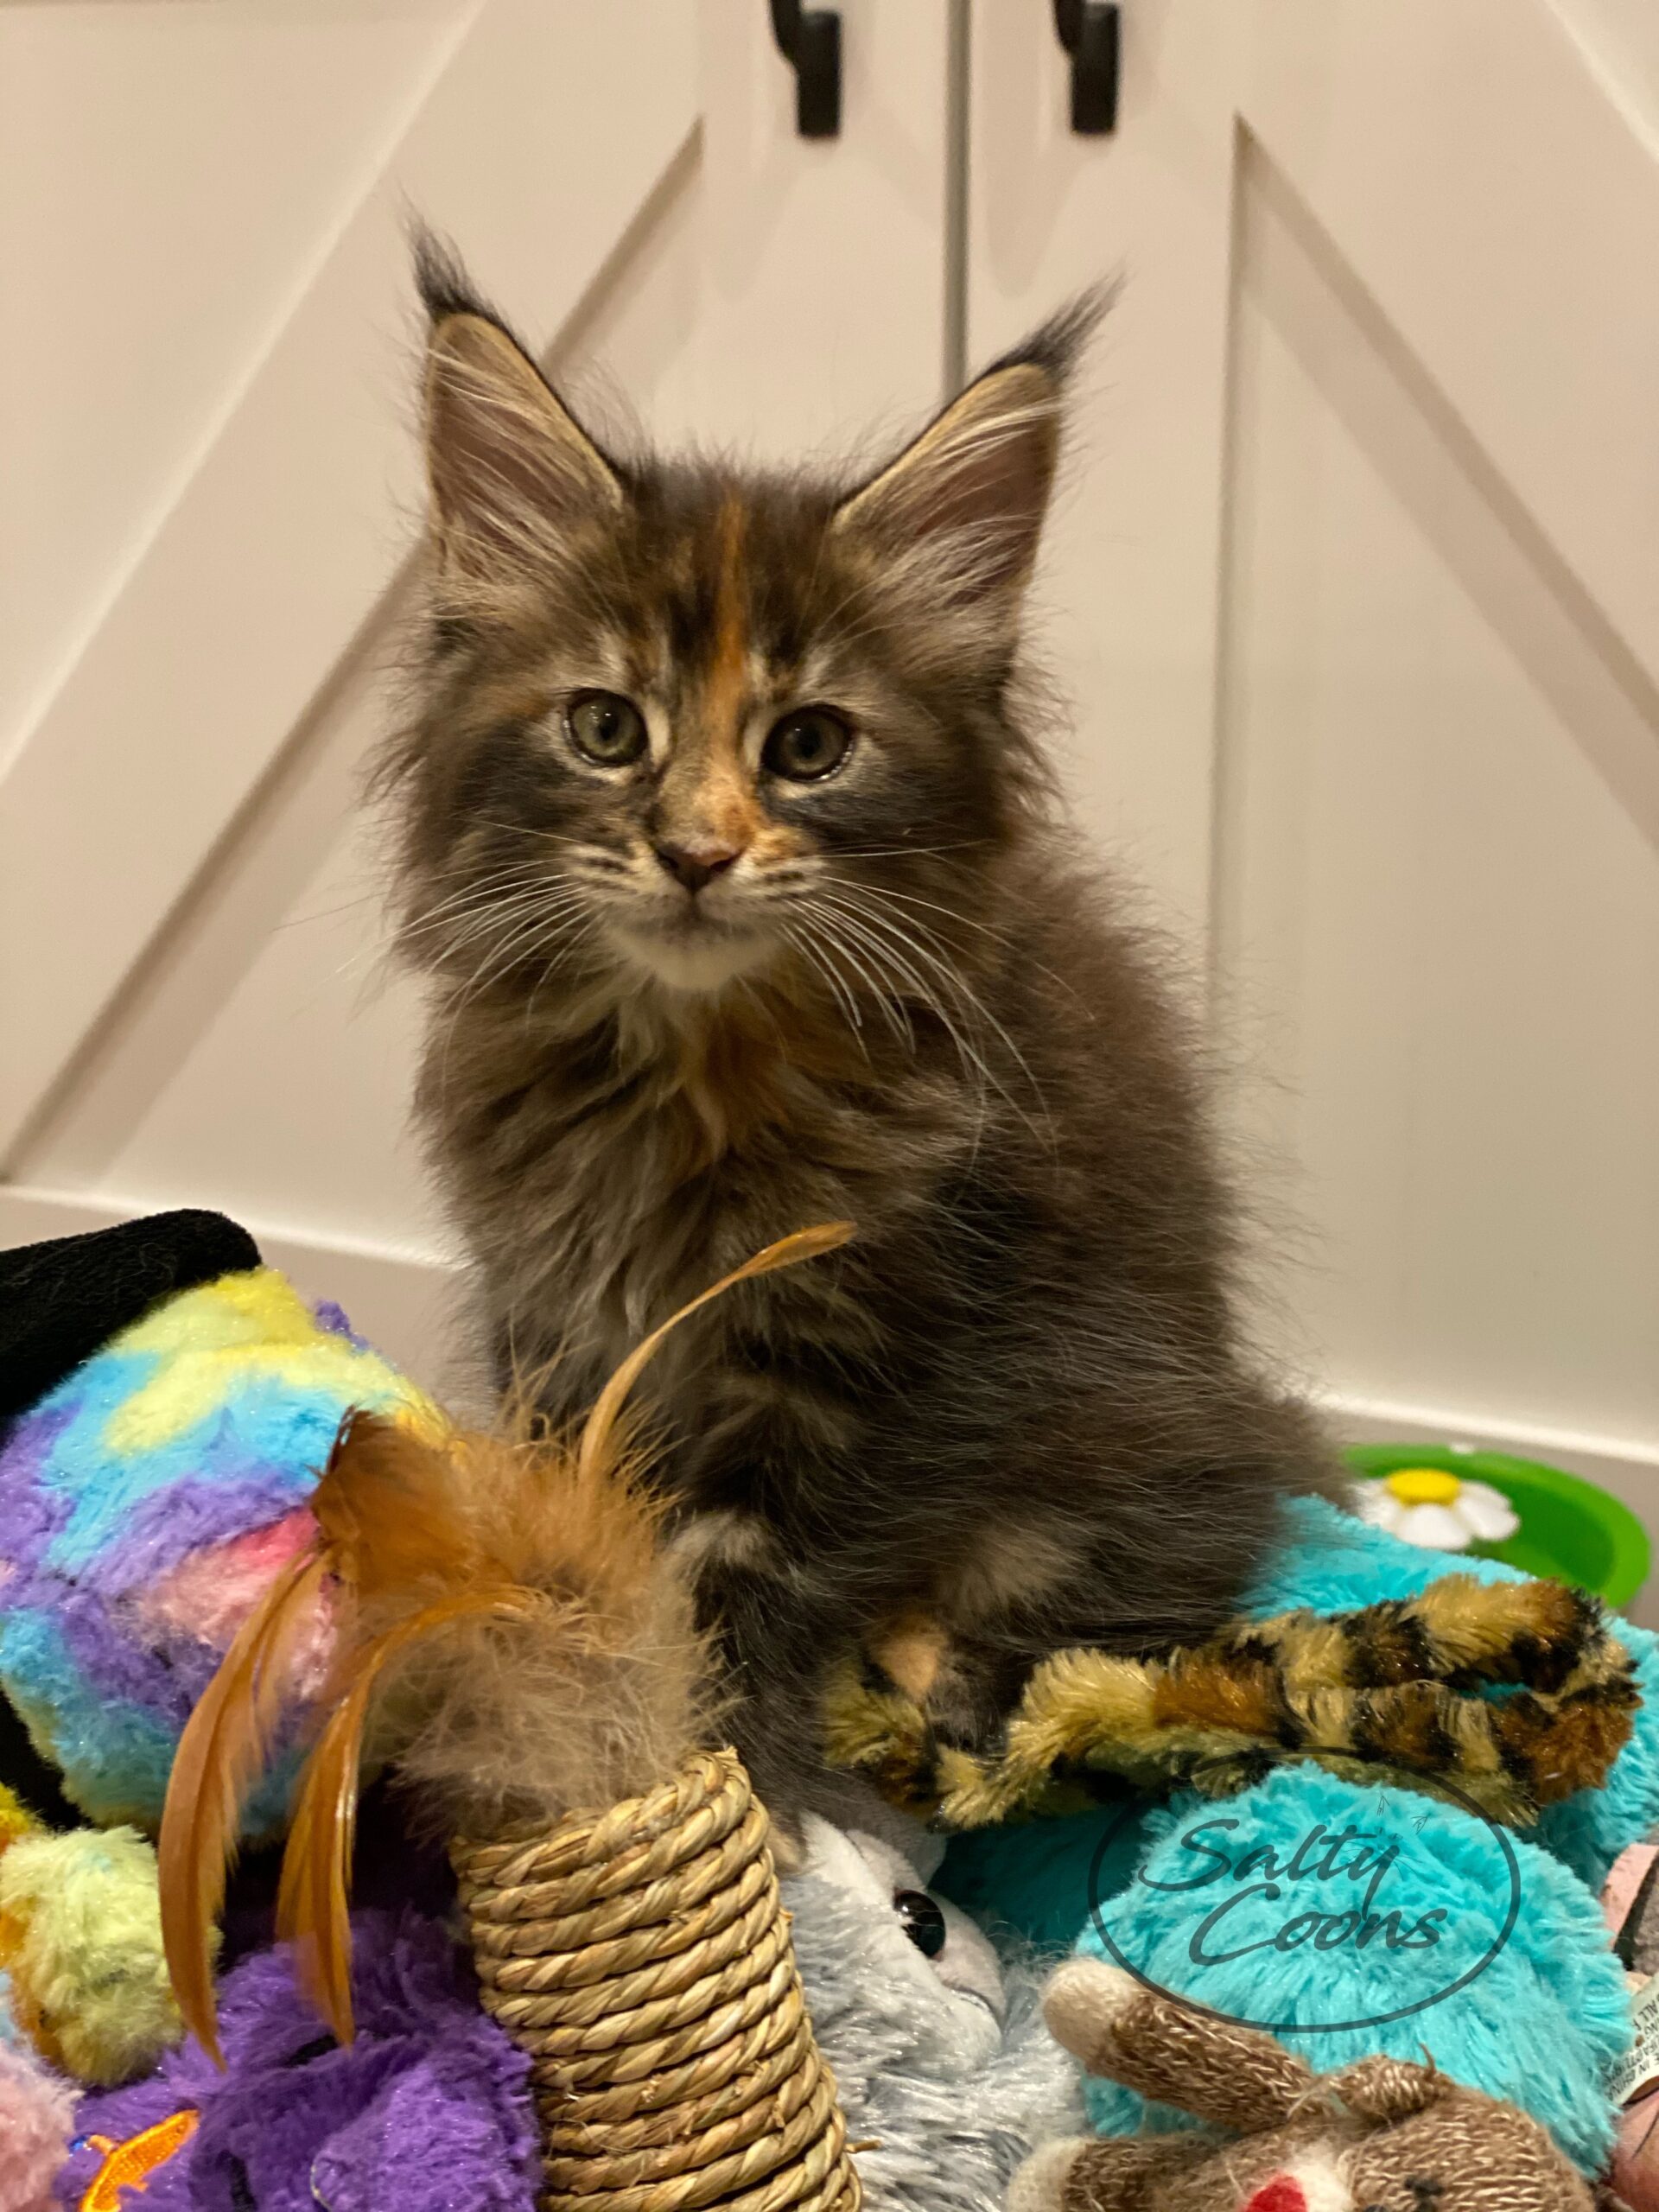 Maine Coon Cats for Sale - Salty Coons - 20 Years of Experience